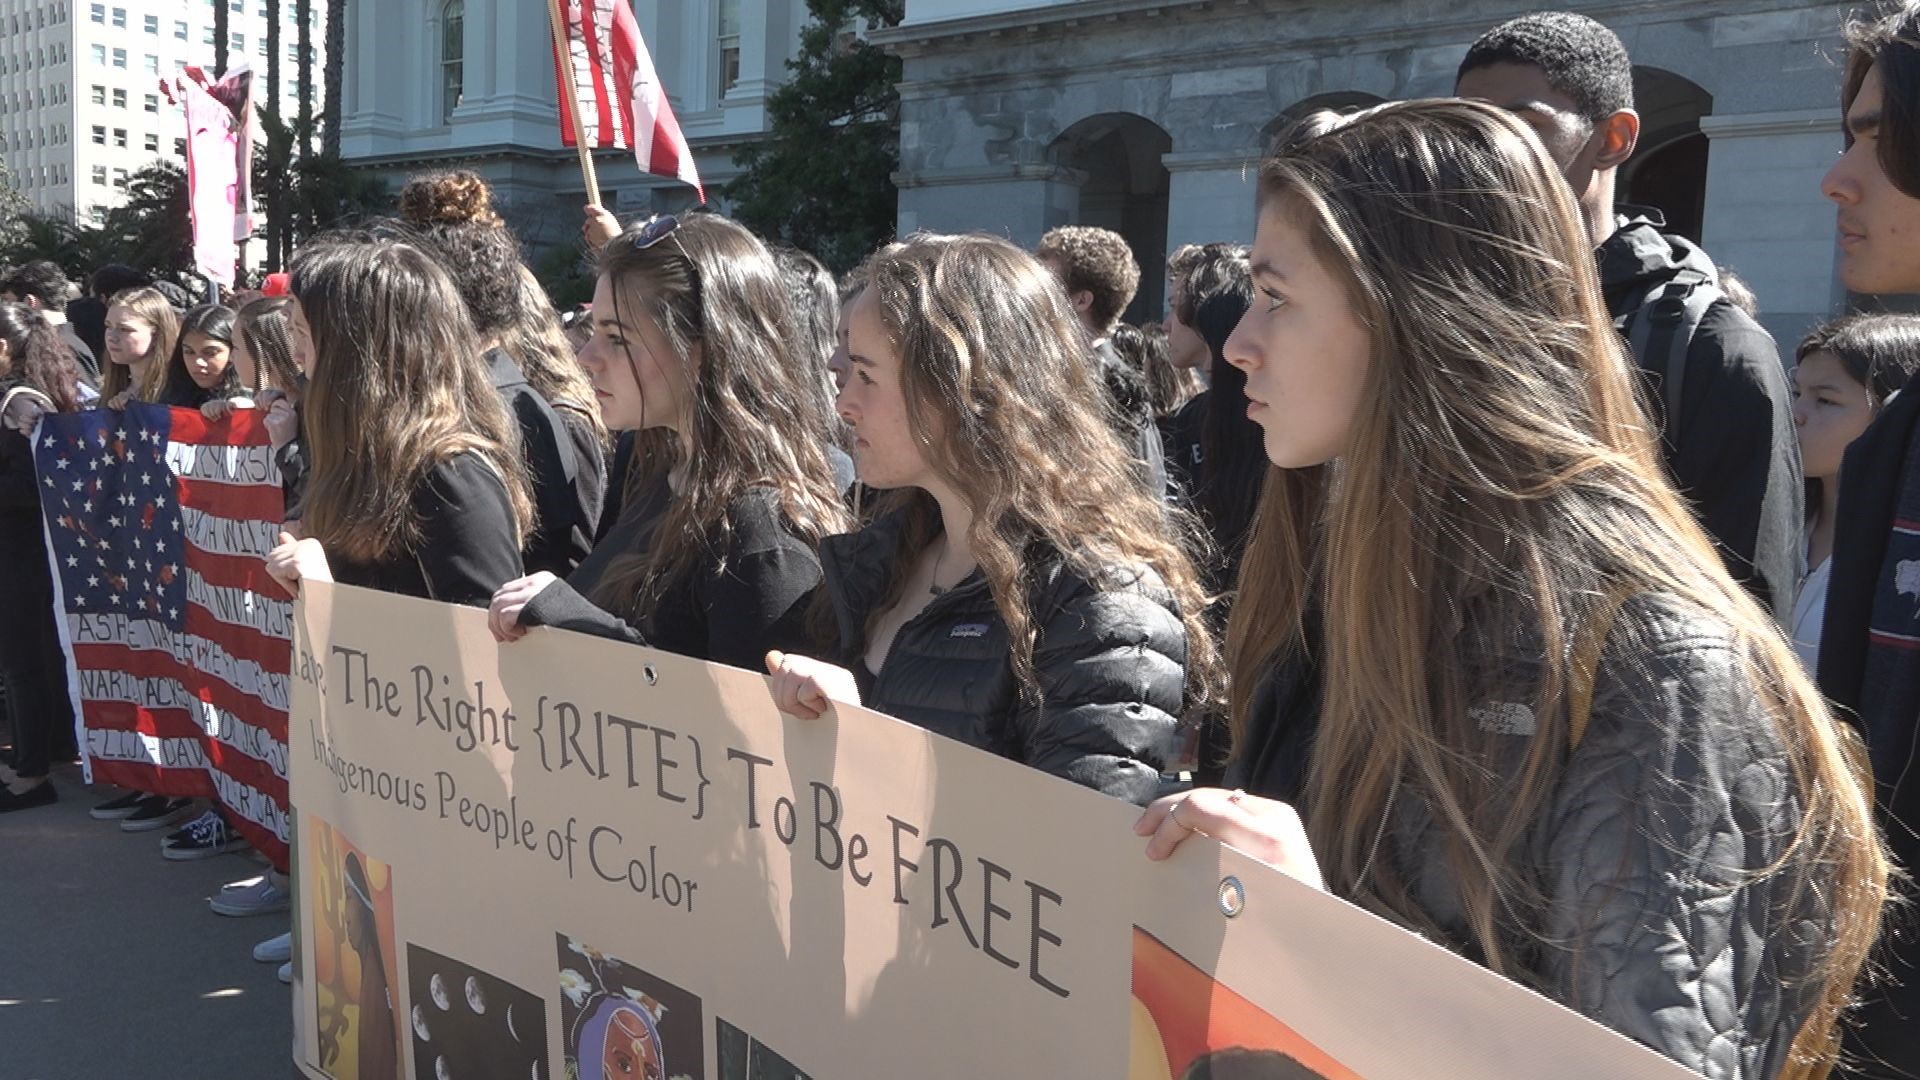 Family members of gun violence victims joined hundreds of students protesting gun violence on the steps of the California state capitol.  They were joined by about 300 students with the group, Bay Area Student Activists (BASA), who wore black to show solidarity.